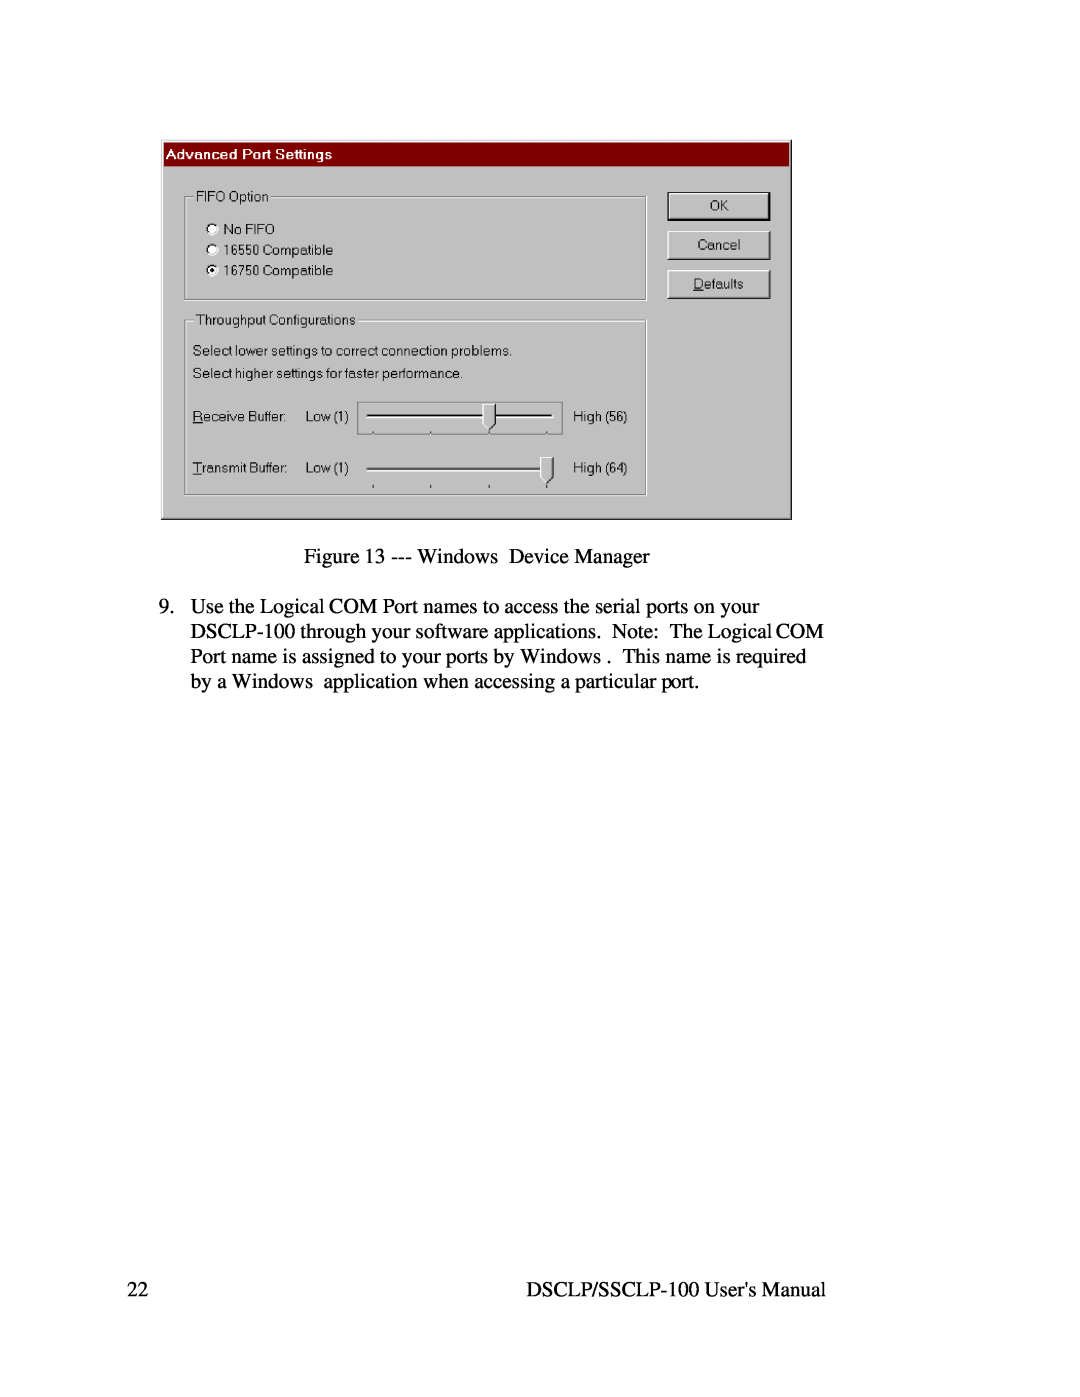 Quatech user manual Windows Device Manager, DSCLP/SSCLP-100 Users Manual 